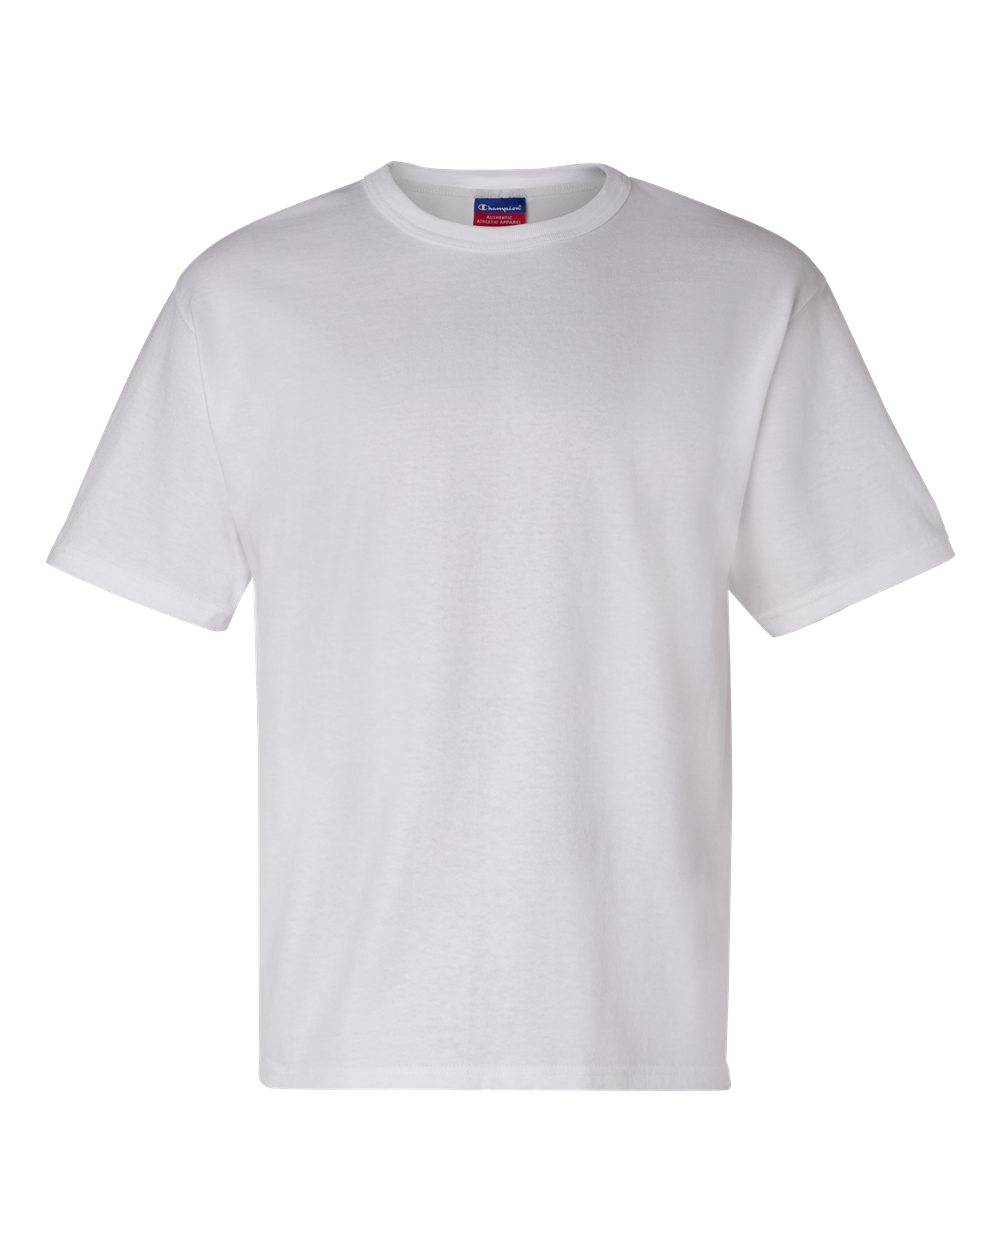 Champion Mens Blank Cotton Heritage Jersey T Shirt Tee T105 up to 3XL ...